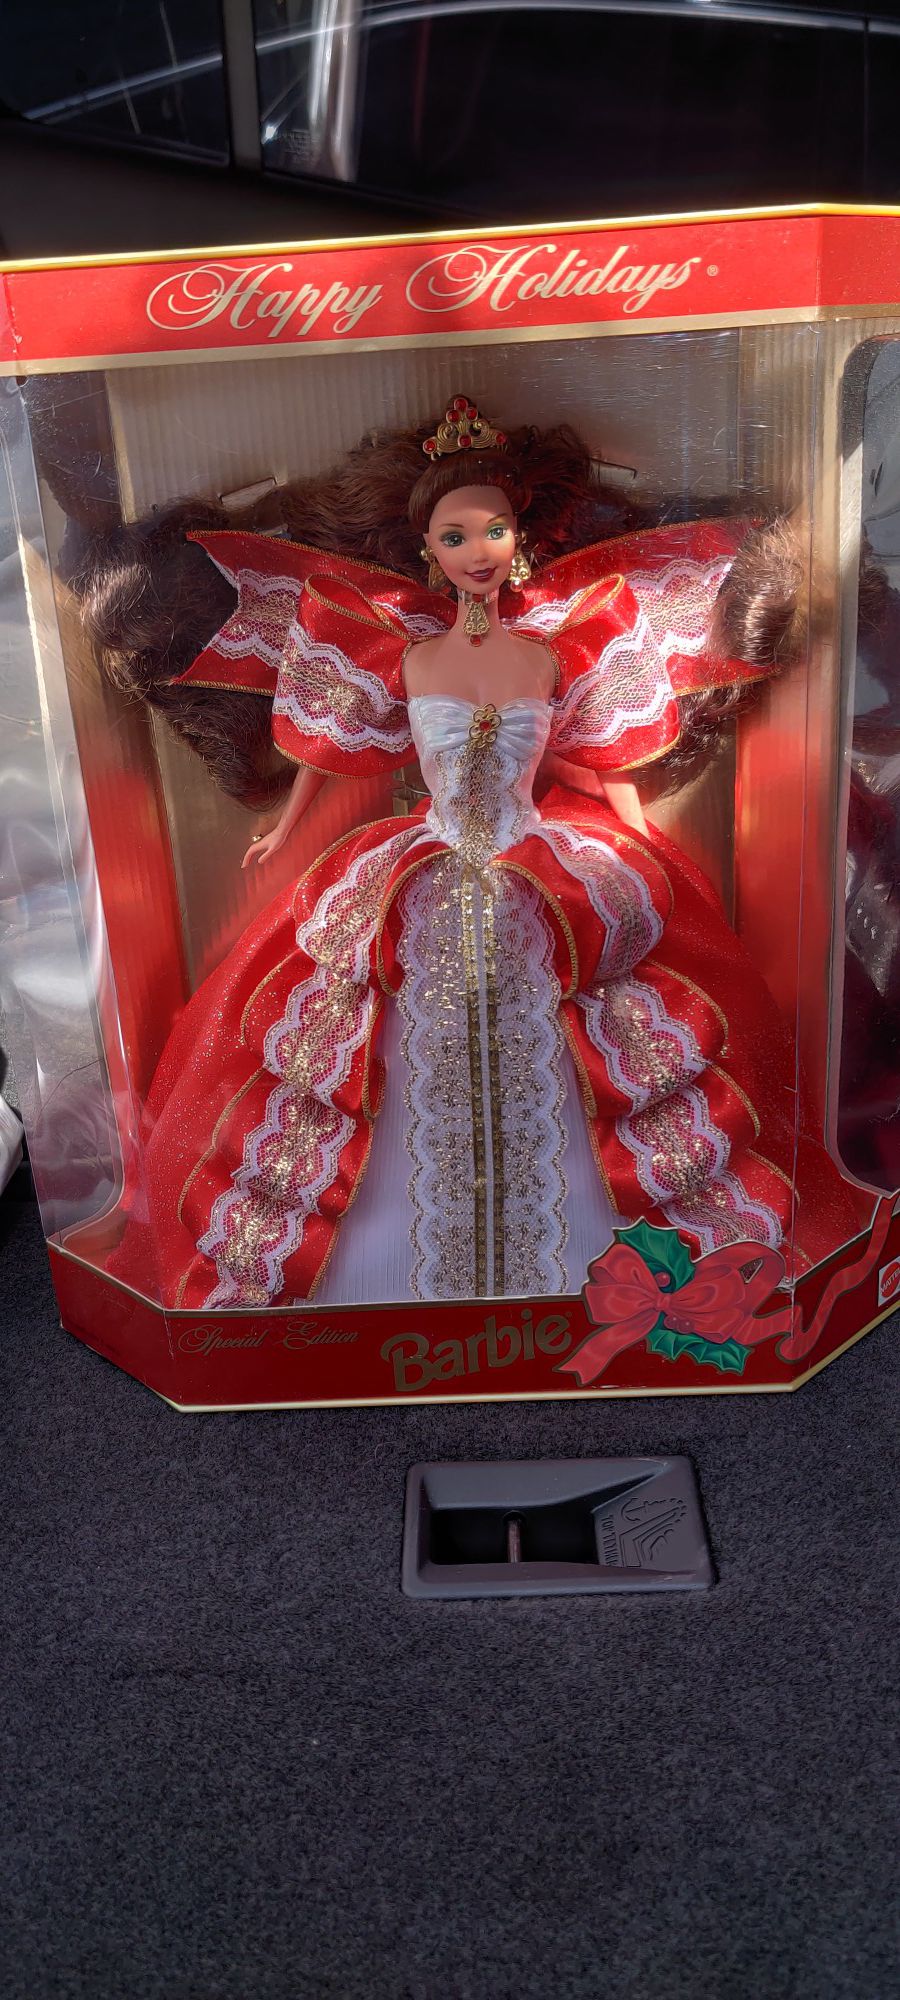 Special Edition 10th Anniversary Barbie